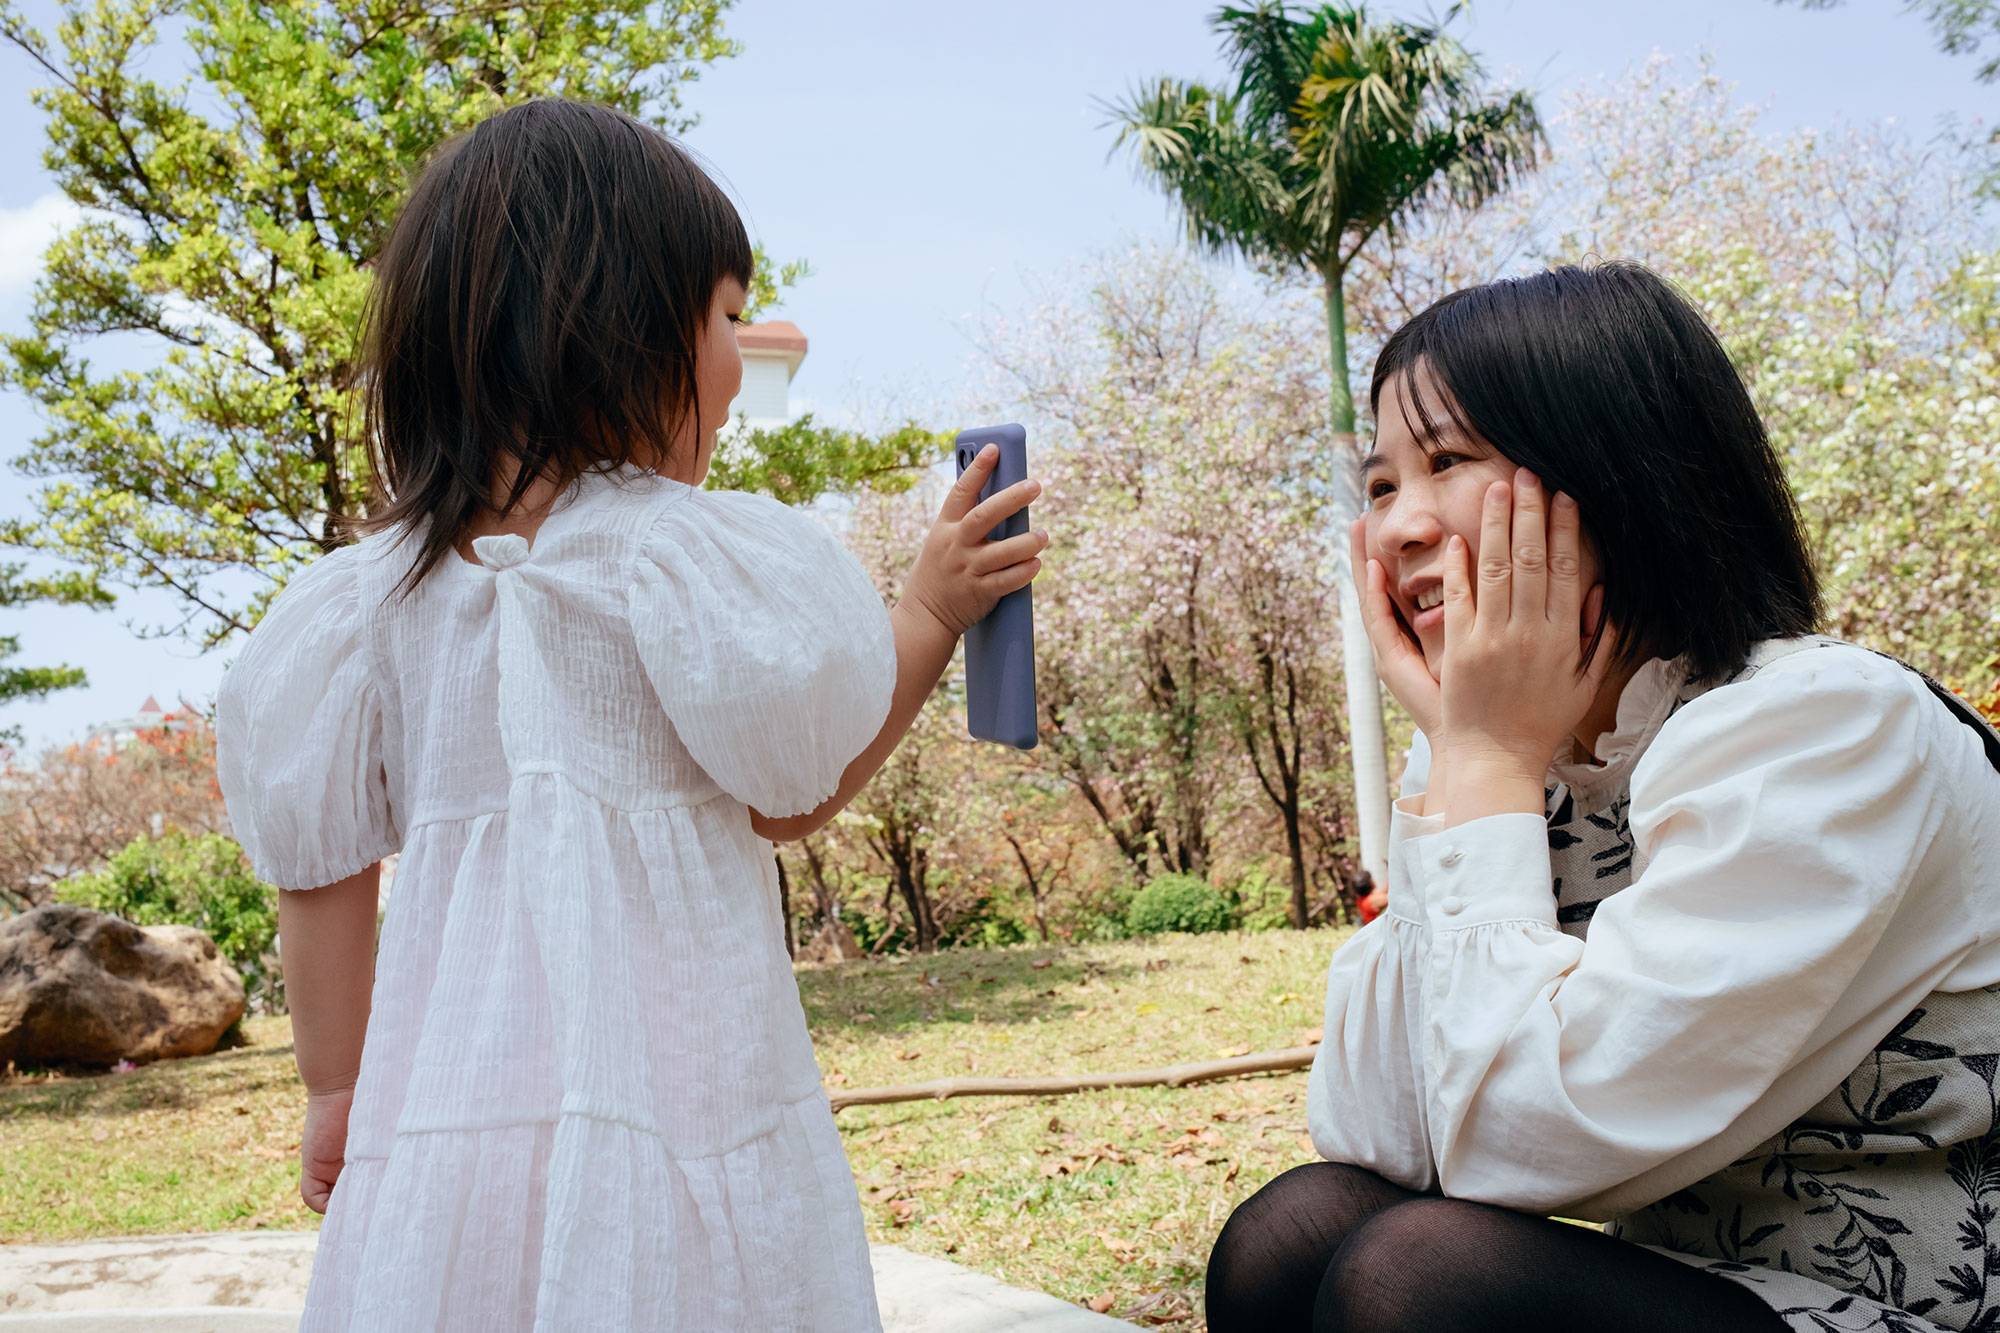 Little Girl Taking Pictures Of Mother With Cell Phone